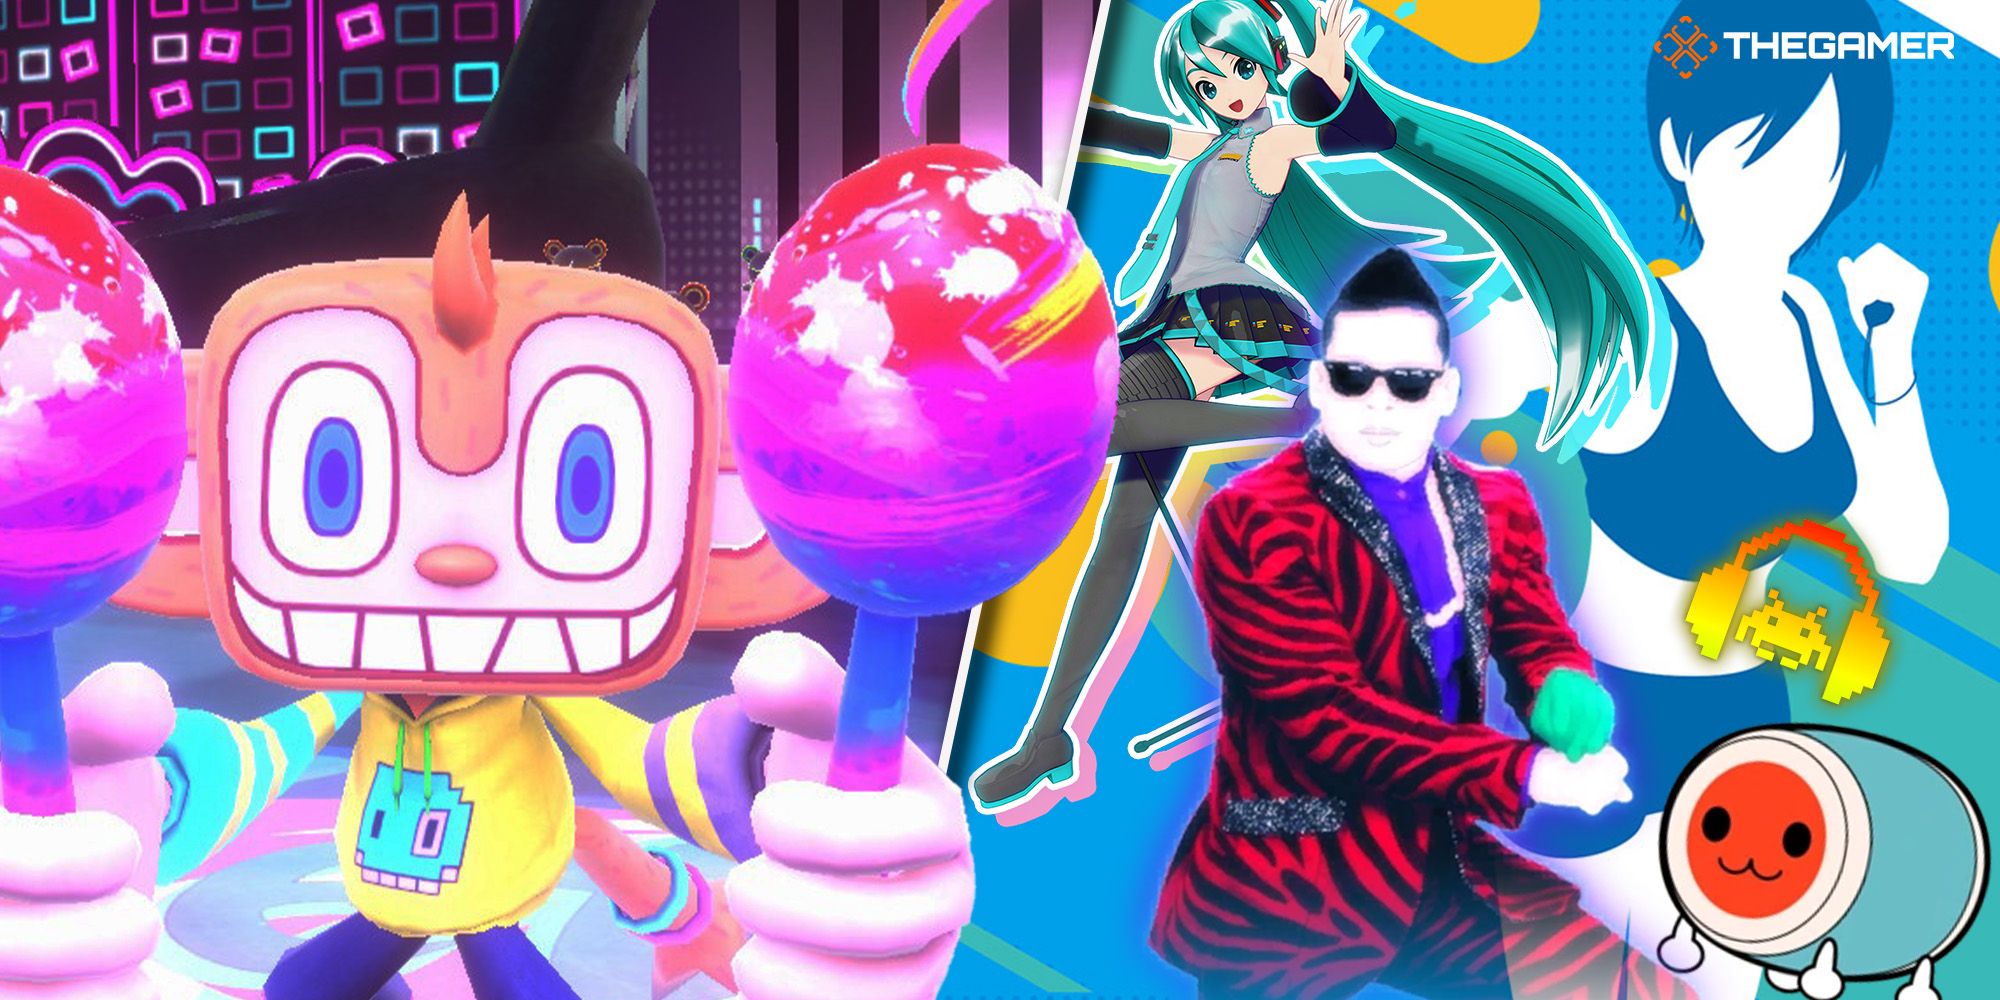 [Left Panel] Amigo holds a pair of maracas. [Right Panel] Characters from Project DIVA, Just Dance, Taiko no Tatsujin, Groove Coaster, and Fitness Boxing dance together.